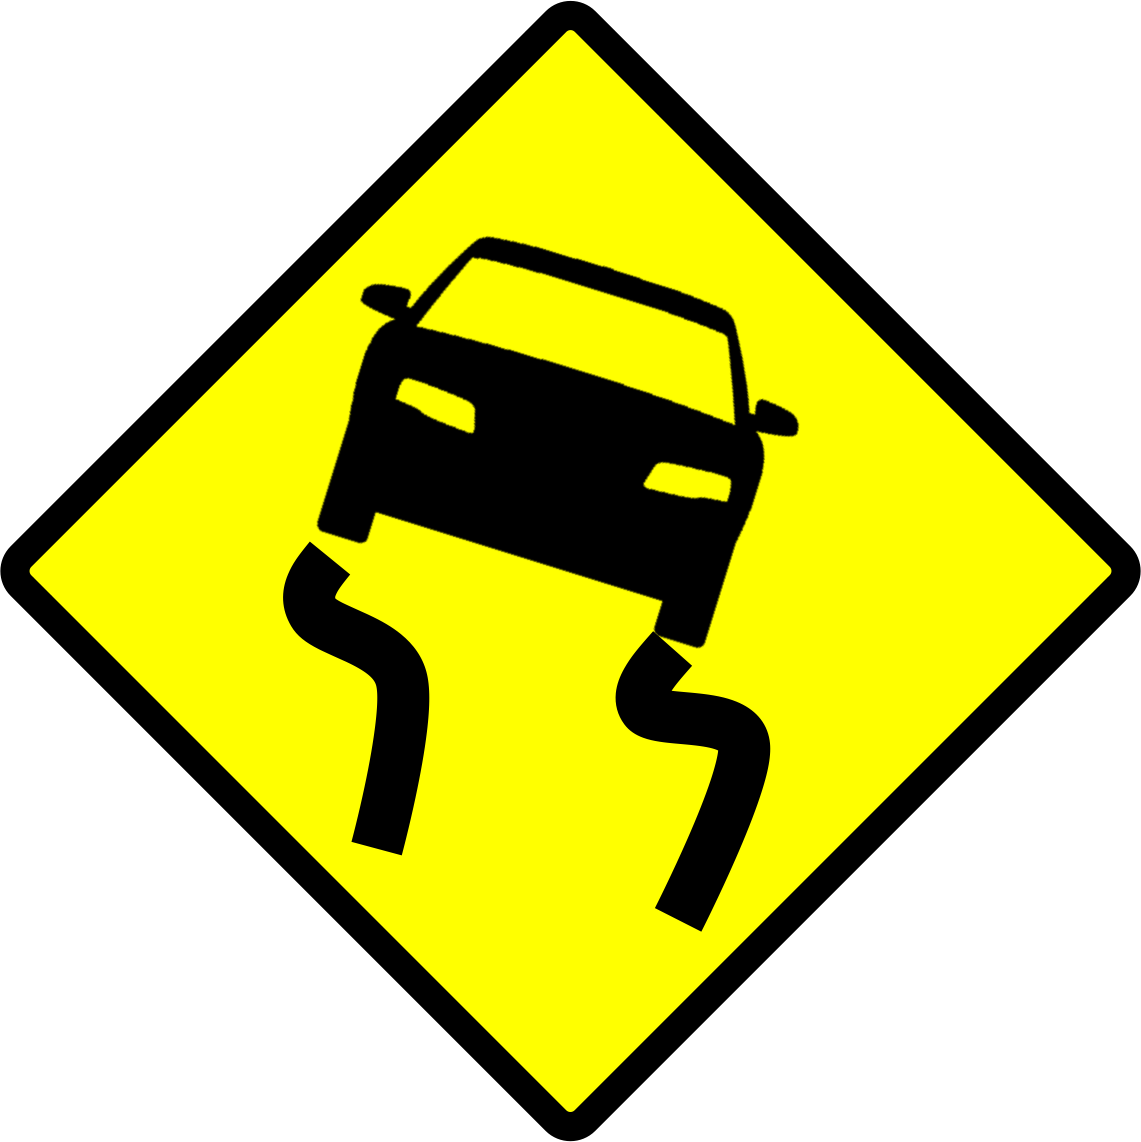 Indonesia New Road Sign 3a - Slippery When Wet Road Sign (1141x1142)